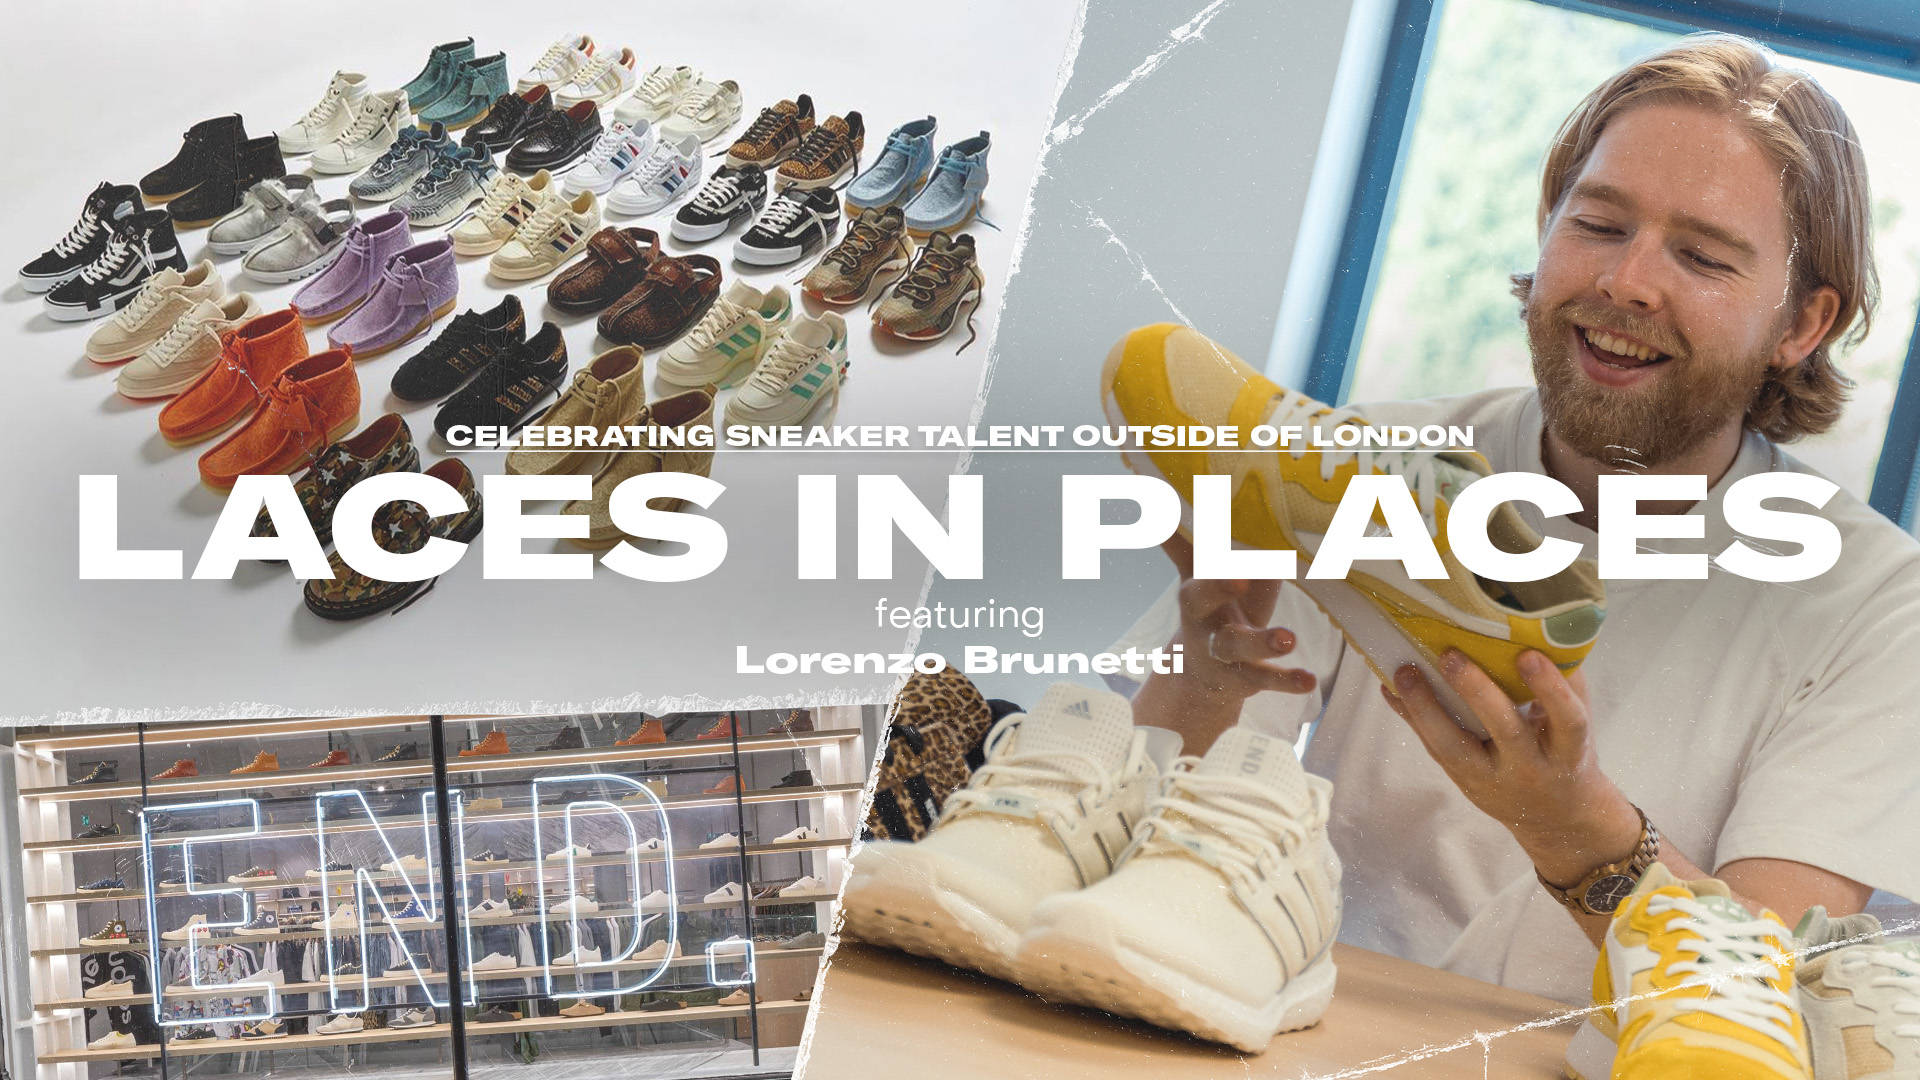 Laces in Places: Lorenzo Brunetti | The Sole Supplier